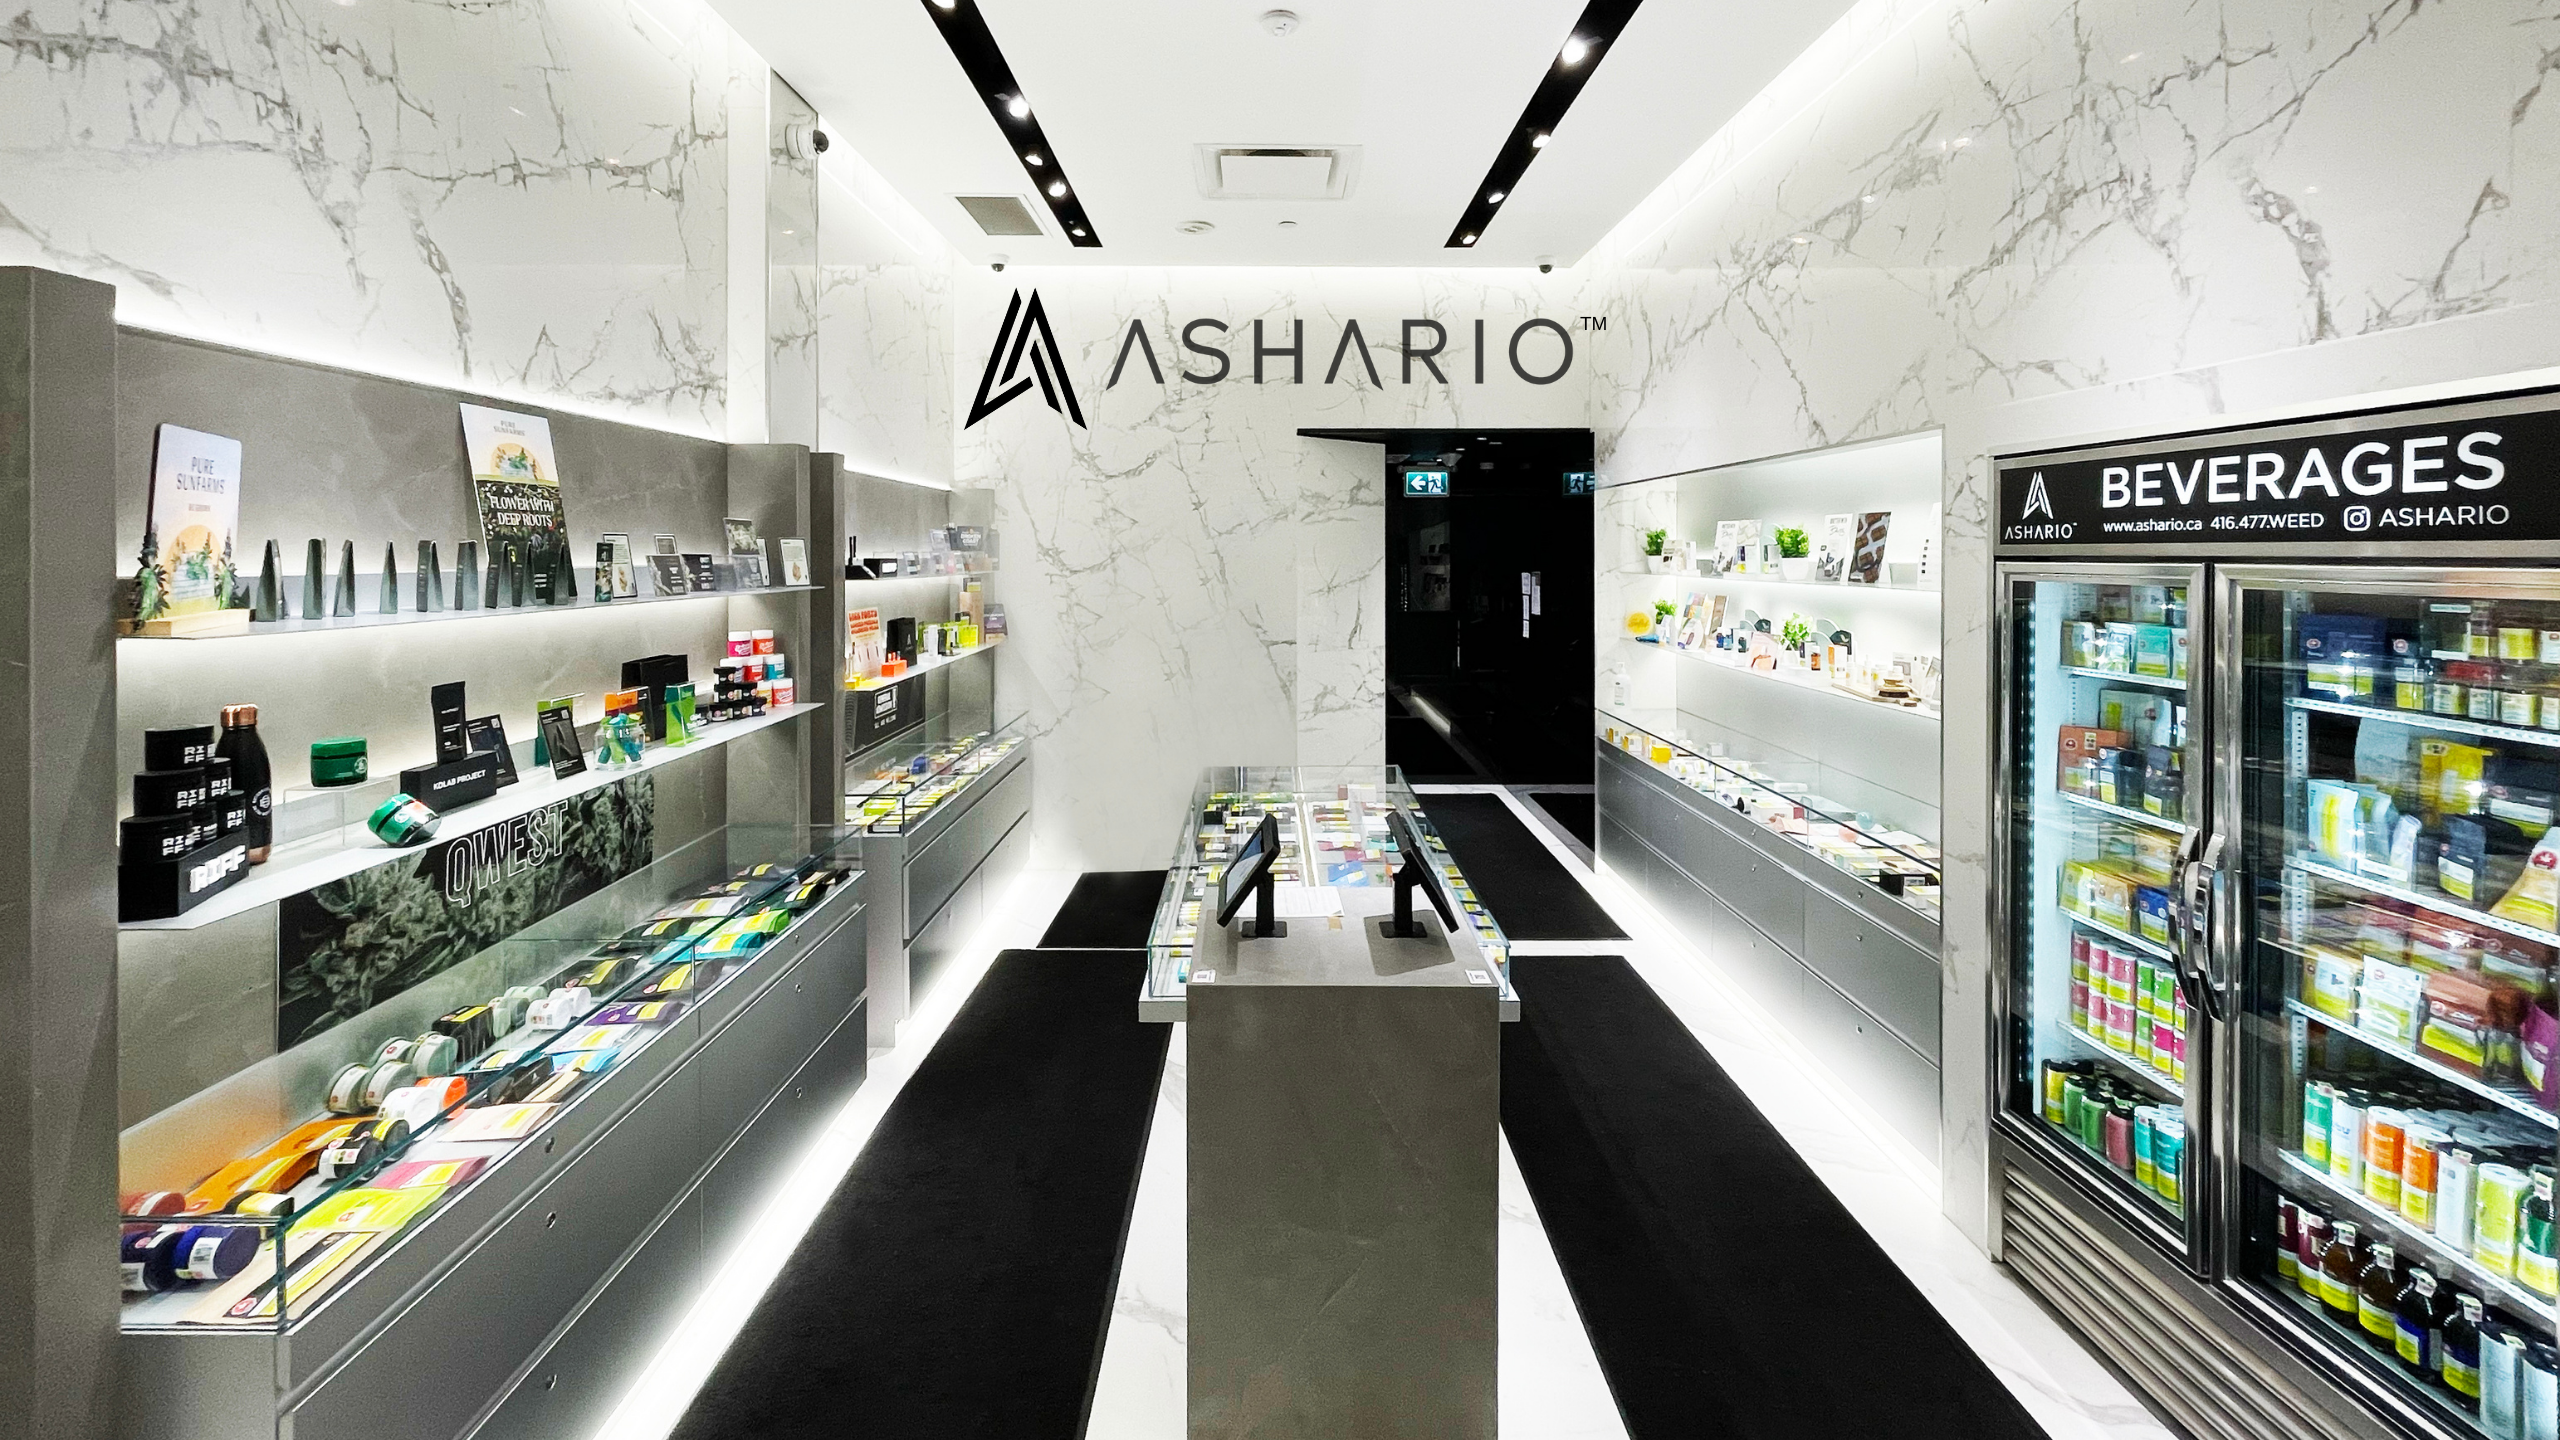 Discover why Ashario Cannabis is the best-reviewed marijuana dispensary in North York. With a focus on quality, customer service, and community, we pride ourselves on providing top-notch products and an exceptional shopping experience. 